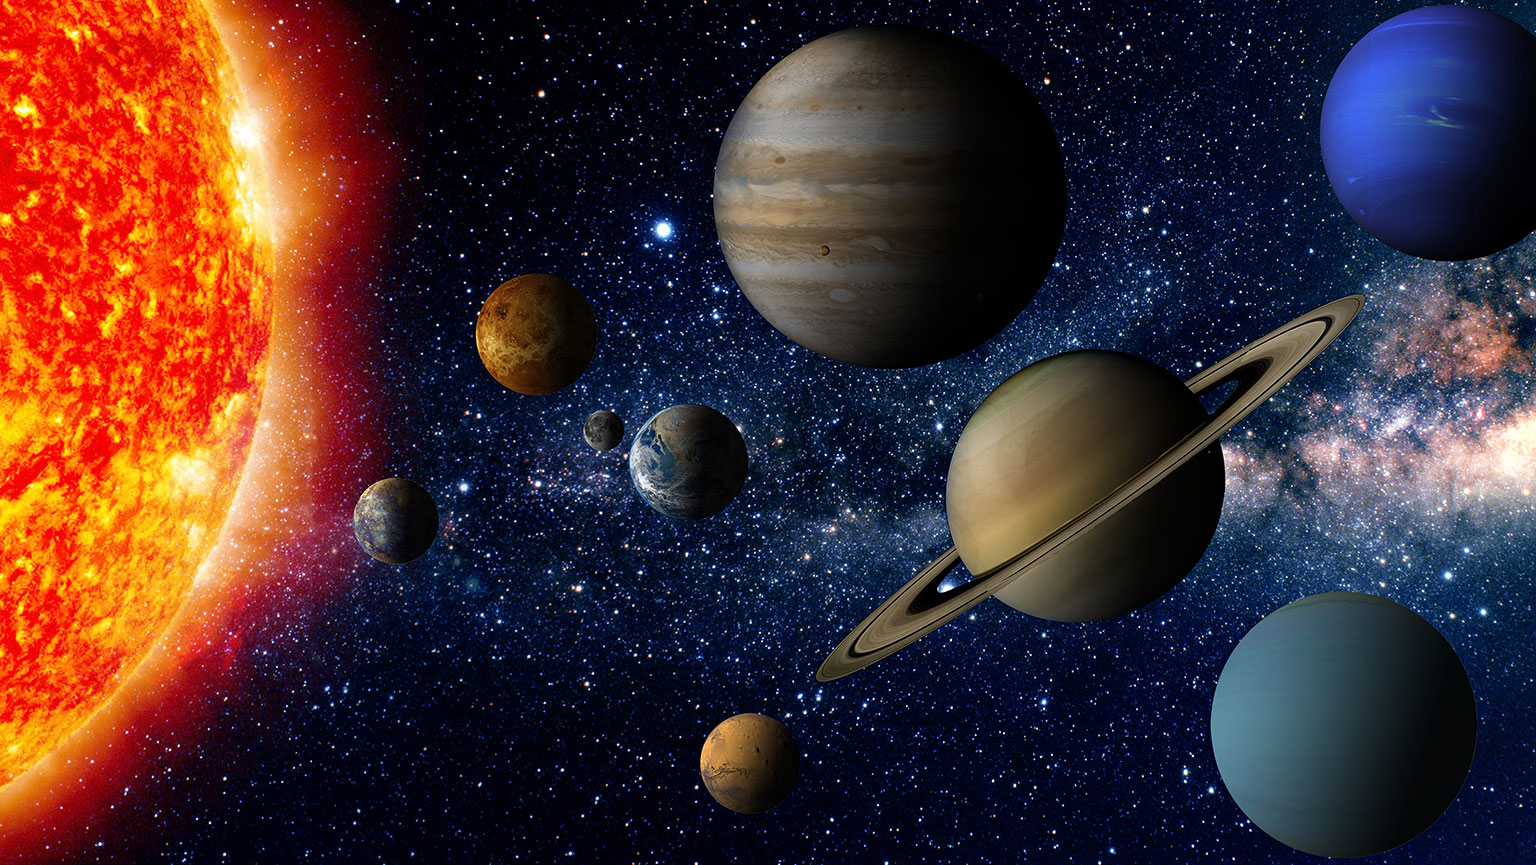 If You Get 13/15 on This General Knowledge Quiz, You’re a Jack of All Trades Solar System